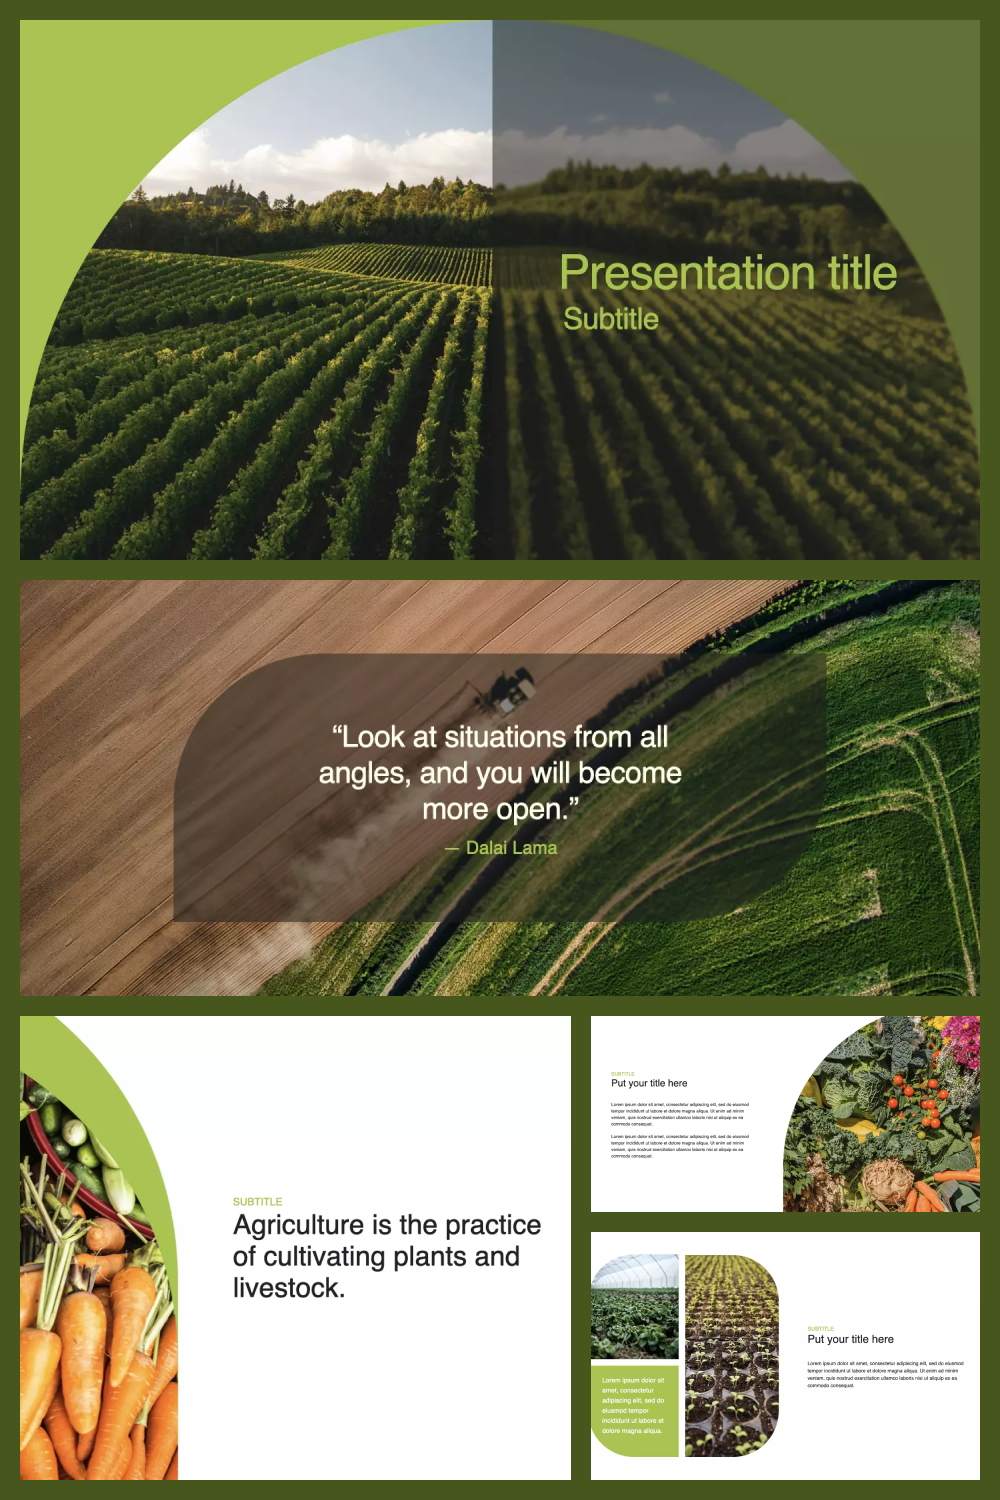 Presentation pages with photos of sown fields.